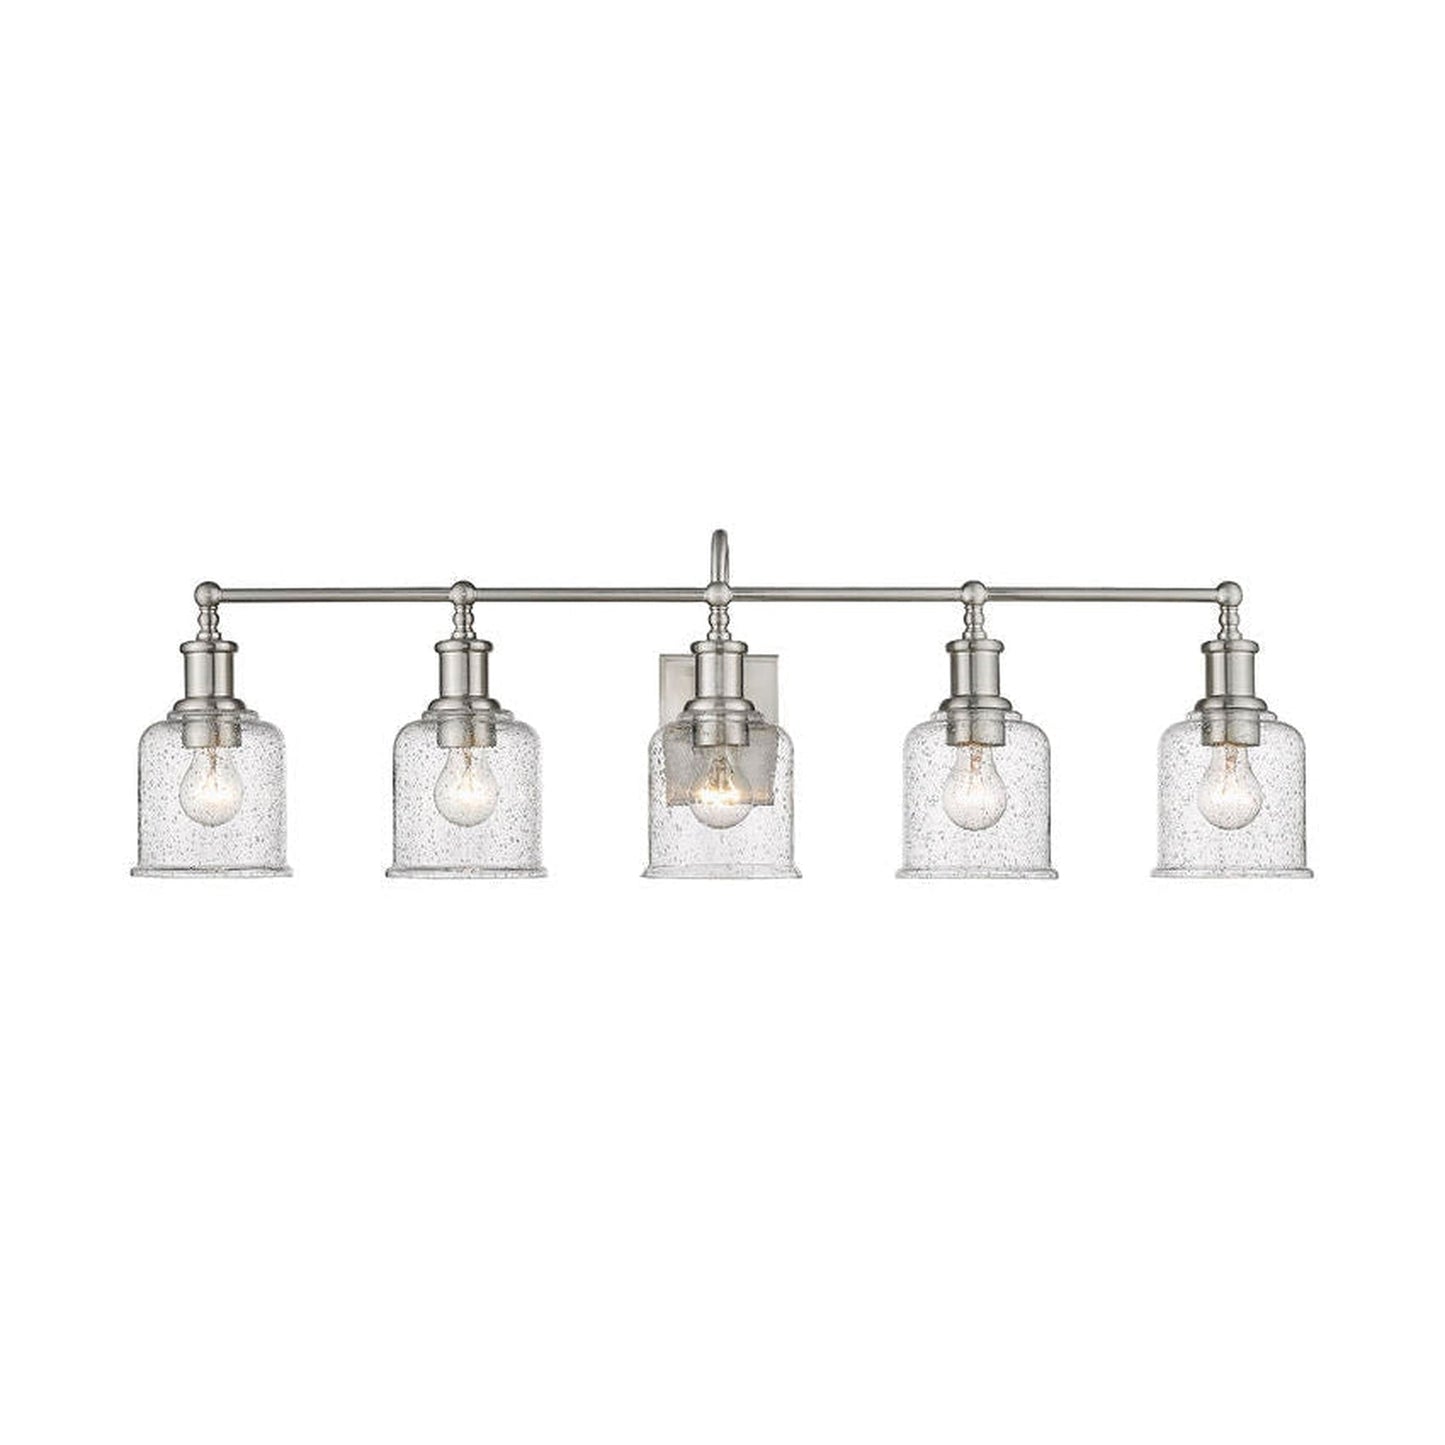 Z-Lite Bryant 41" 5-Light Brushed Nickel Vanity Light With Clear Seedy Glass Shade